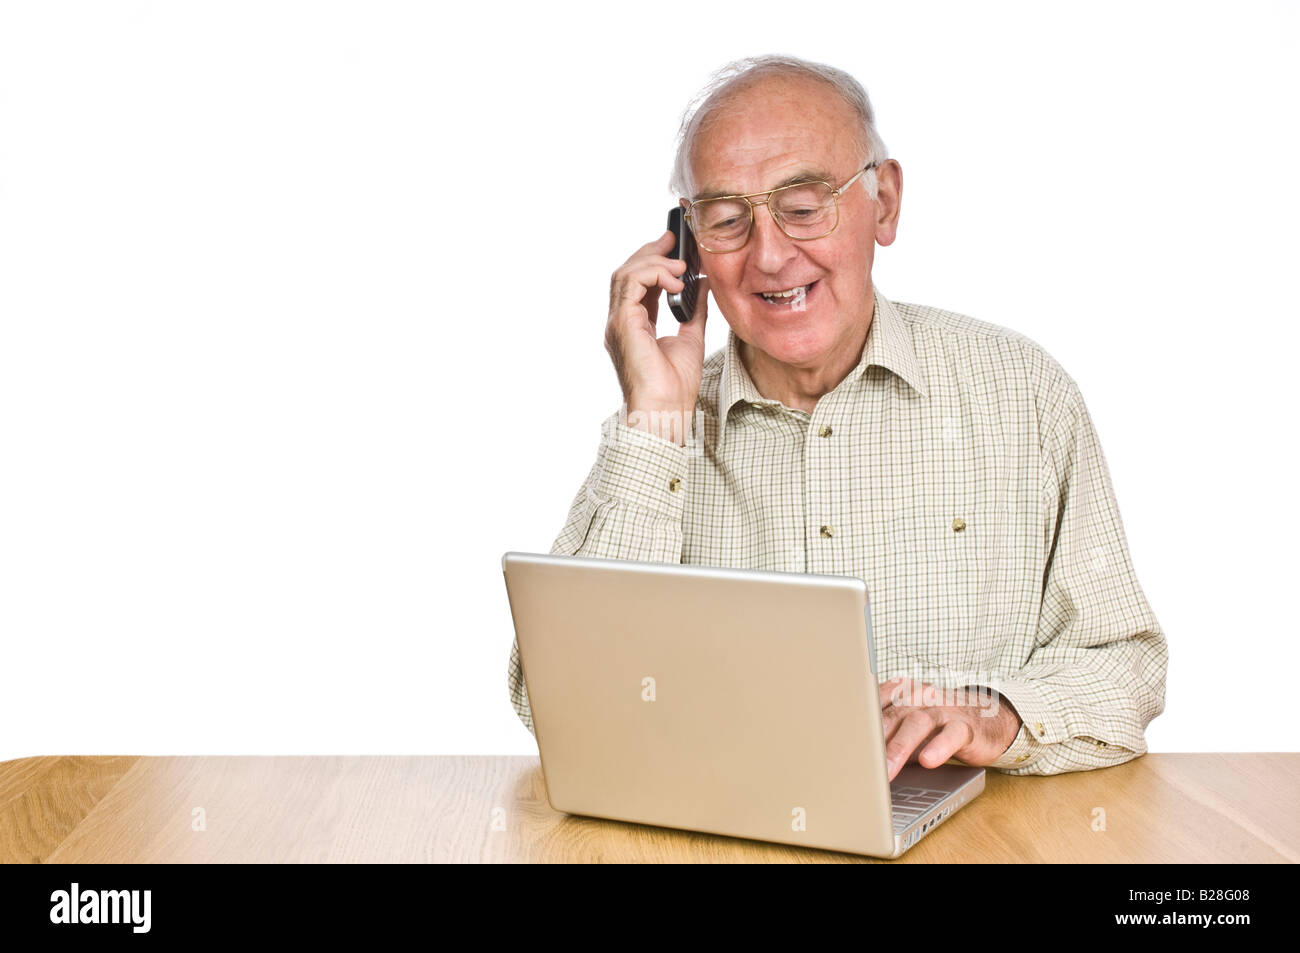 An elderly man at a desk with a lap top computer while talking on a mobile phone against a pure white (255) background. Stock Photo